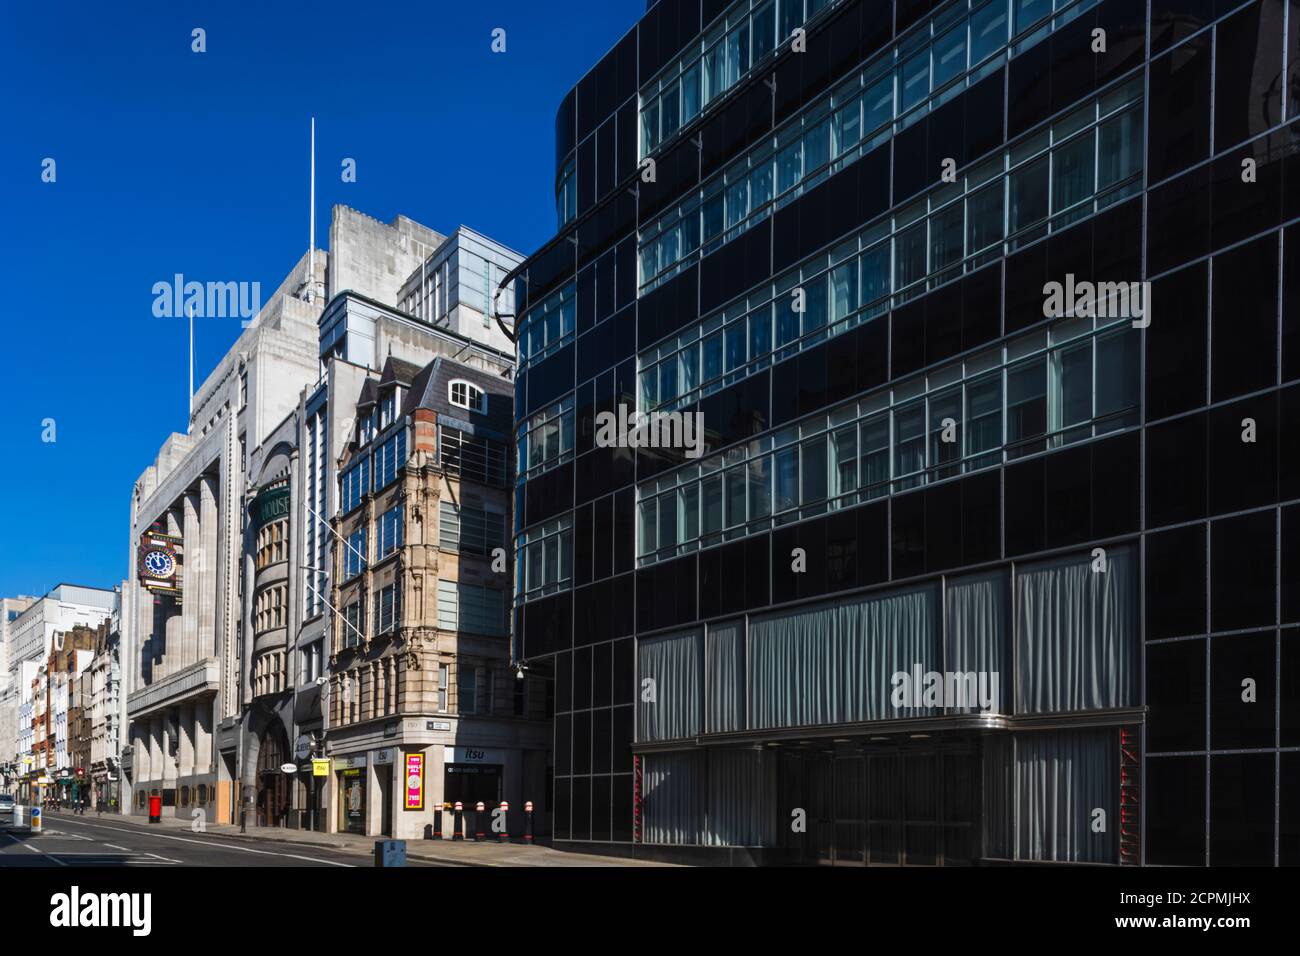 England, London, City of London, Fleet Street, Daily Telegraph Building and Daily Express Building Stock Photo